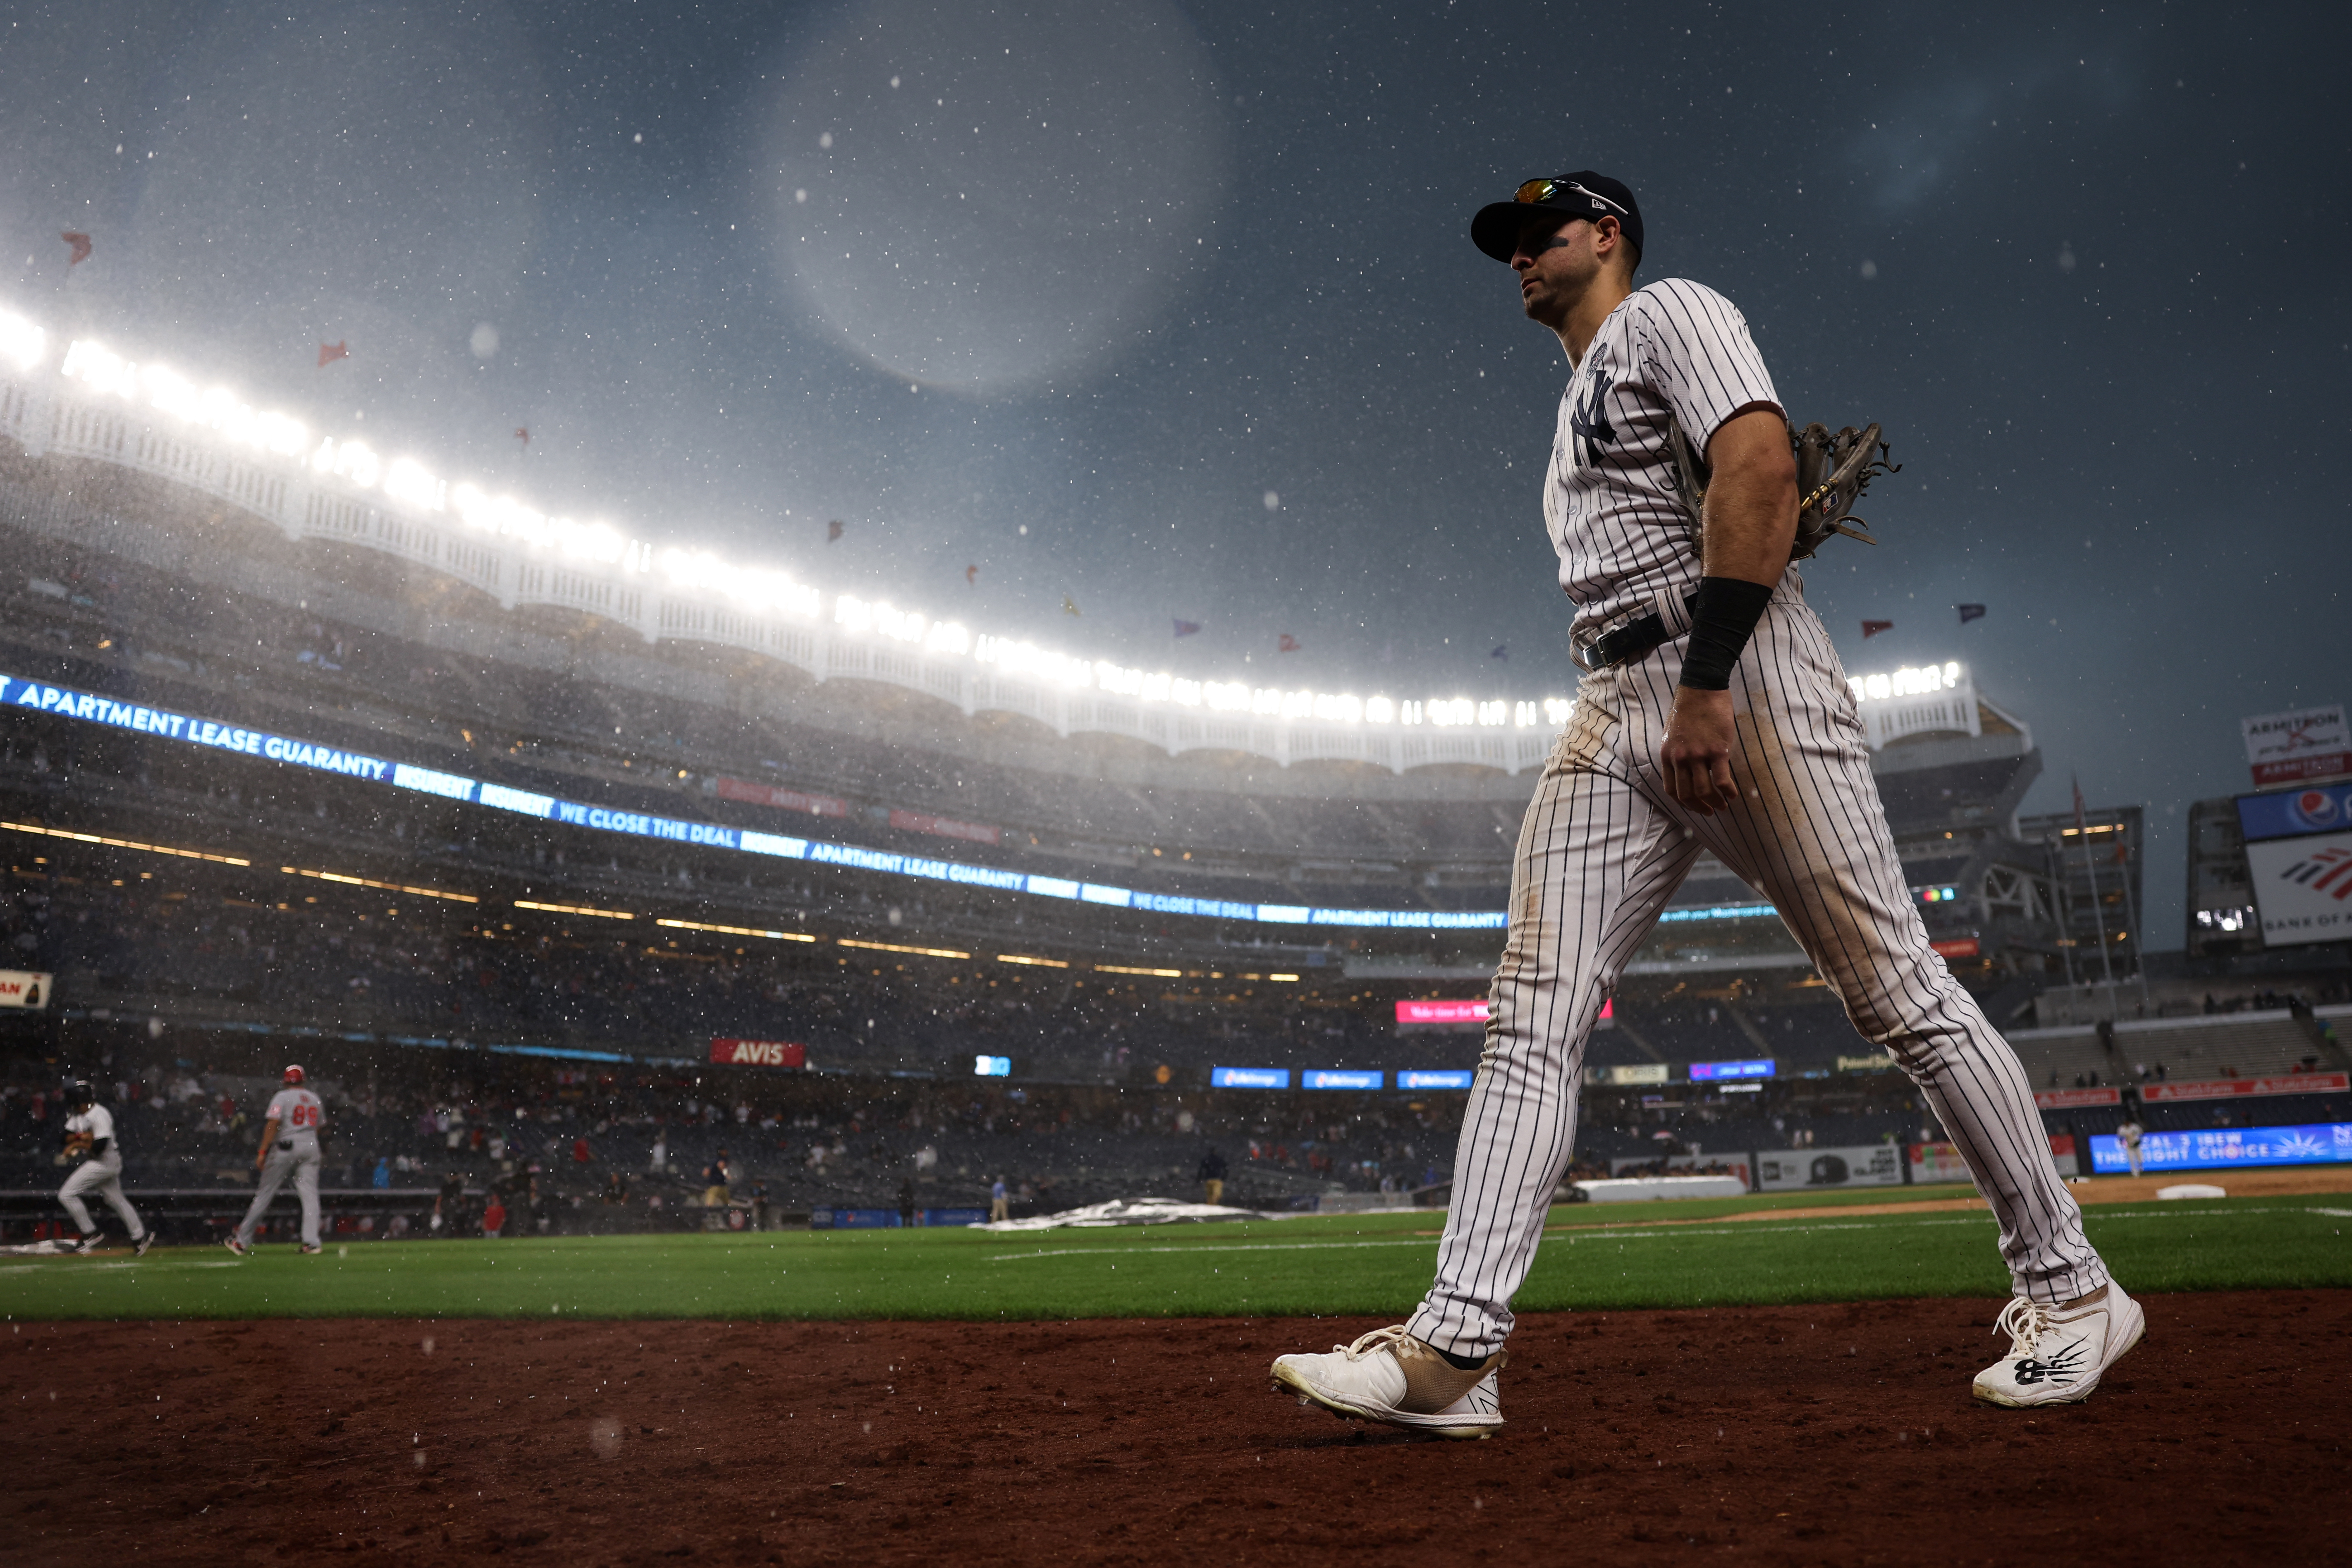 Yankee Stadium Visitor Guide 2023: Everything you need to know - Bounce